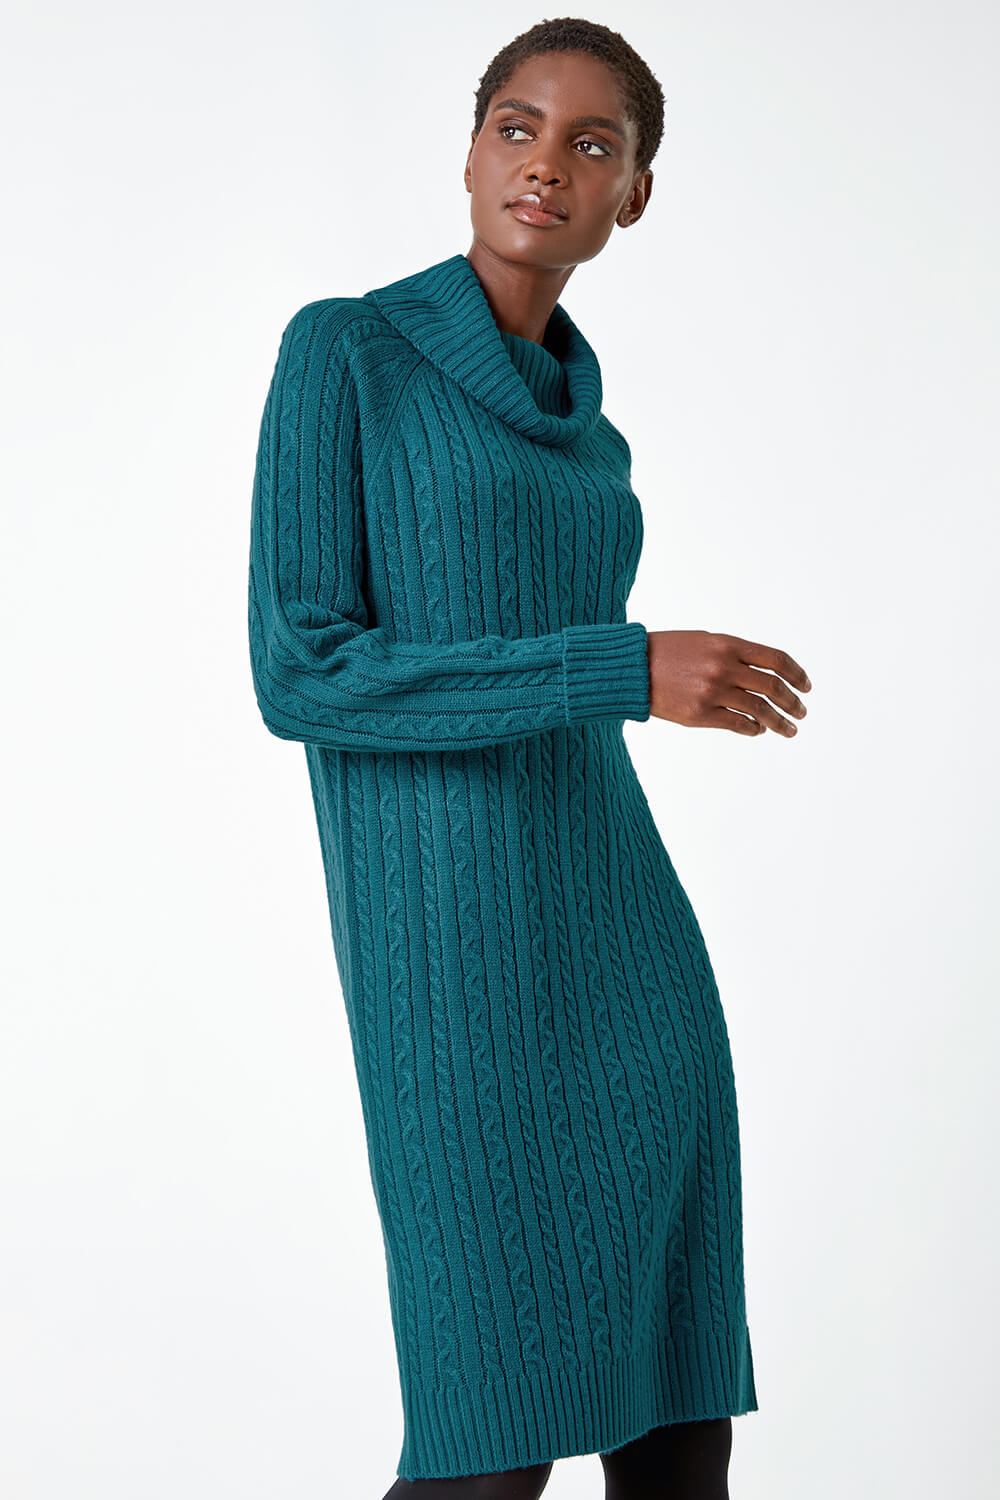 Teal Roll Neck Knitted Jumper Dress, Image 4 of 5